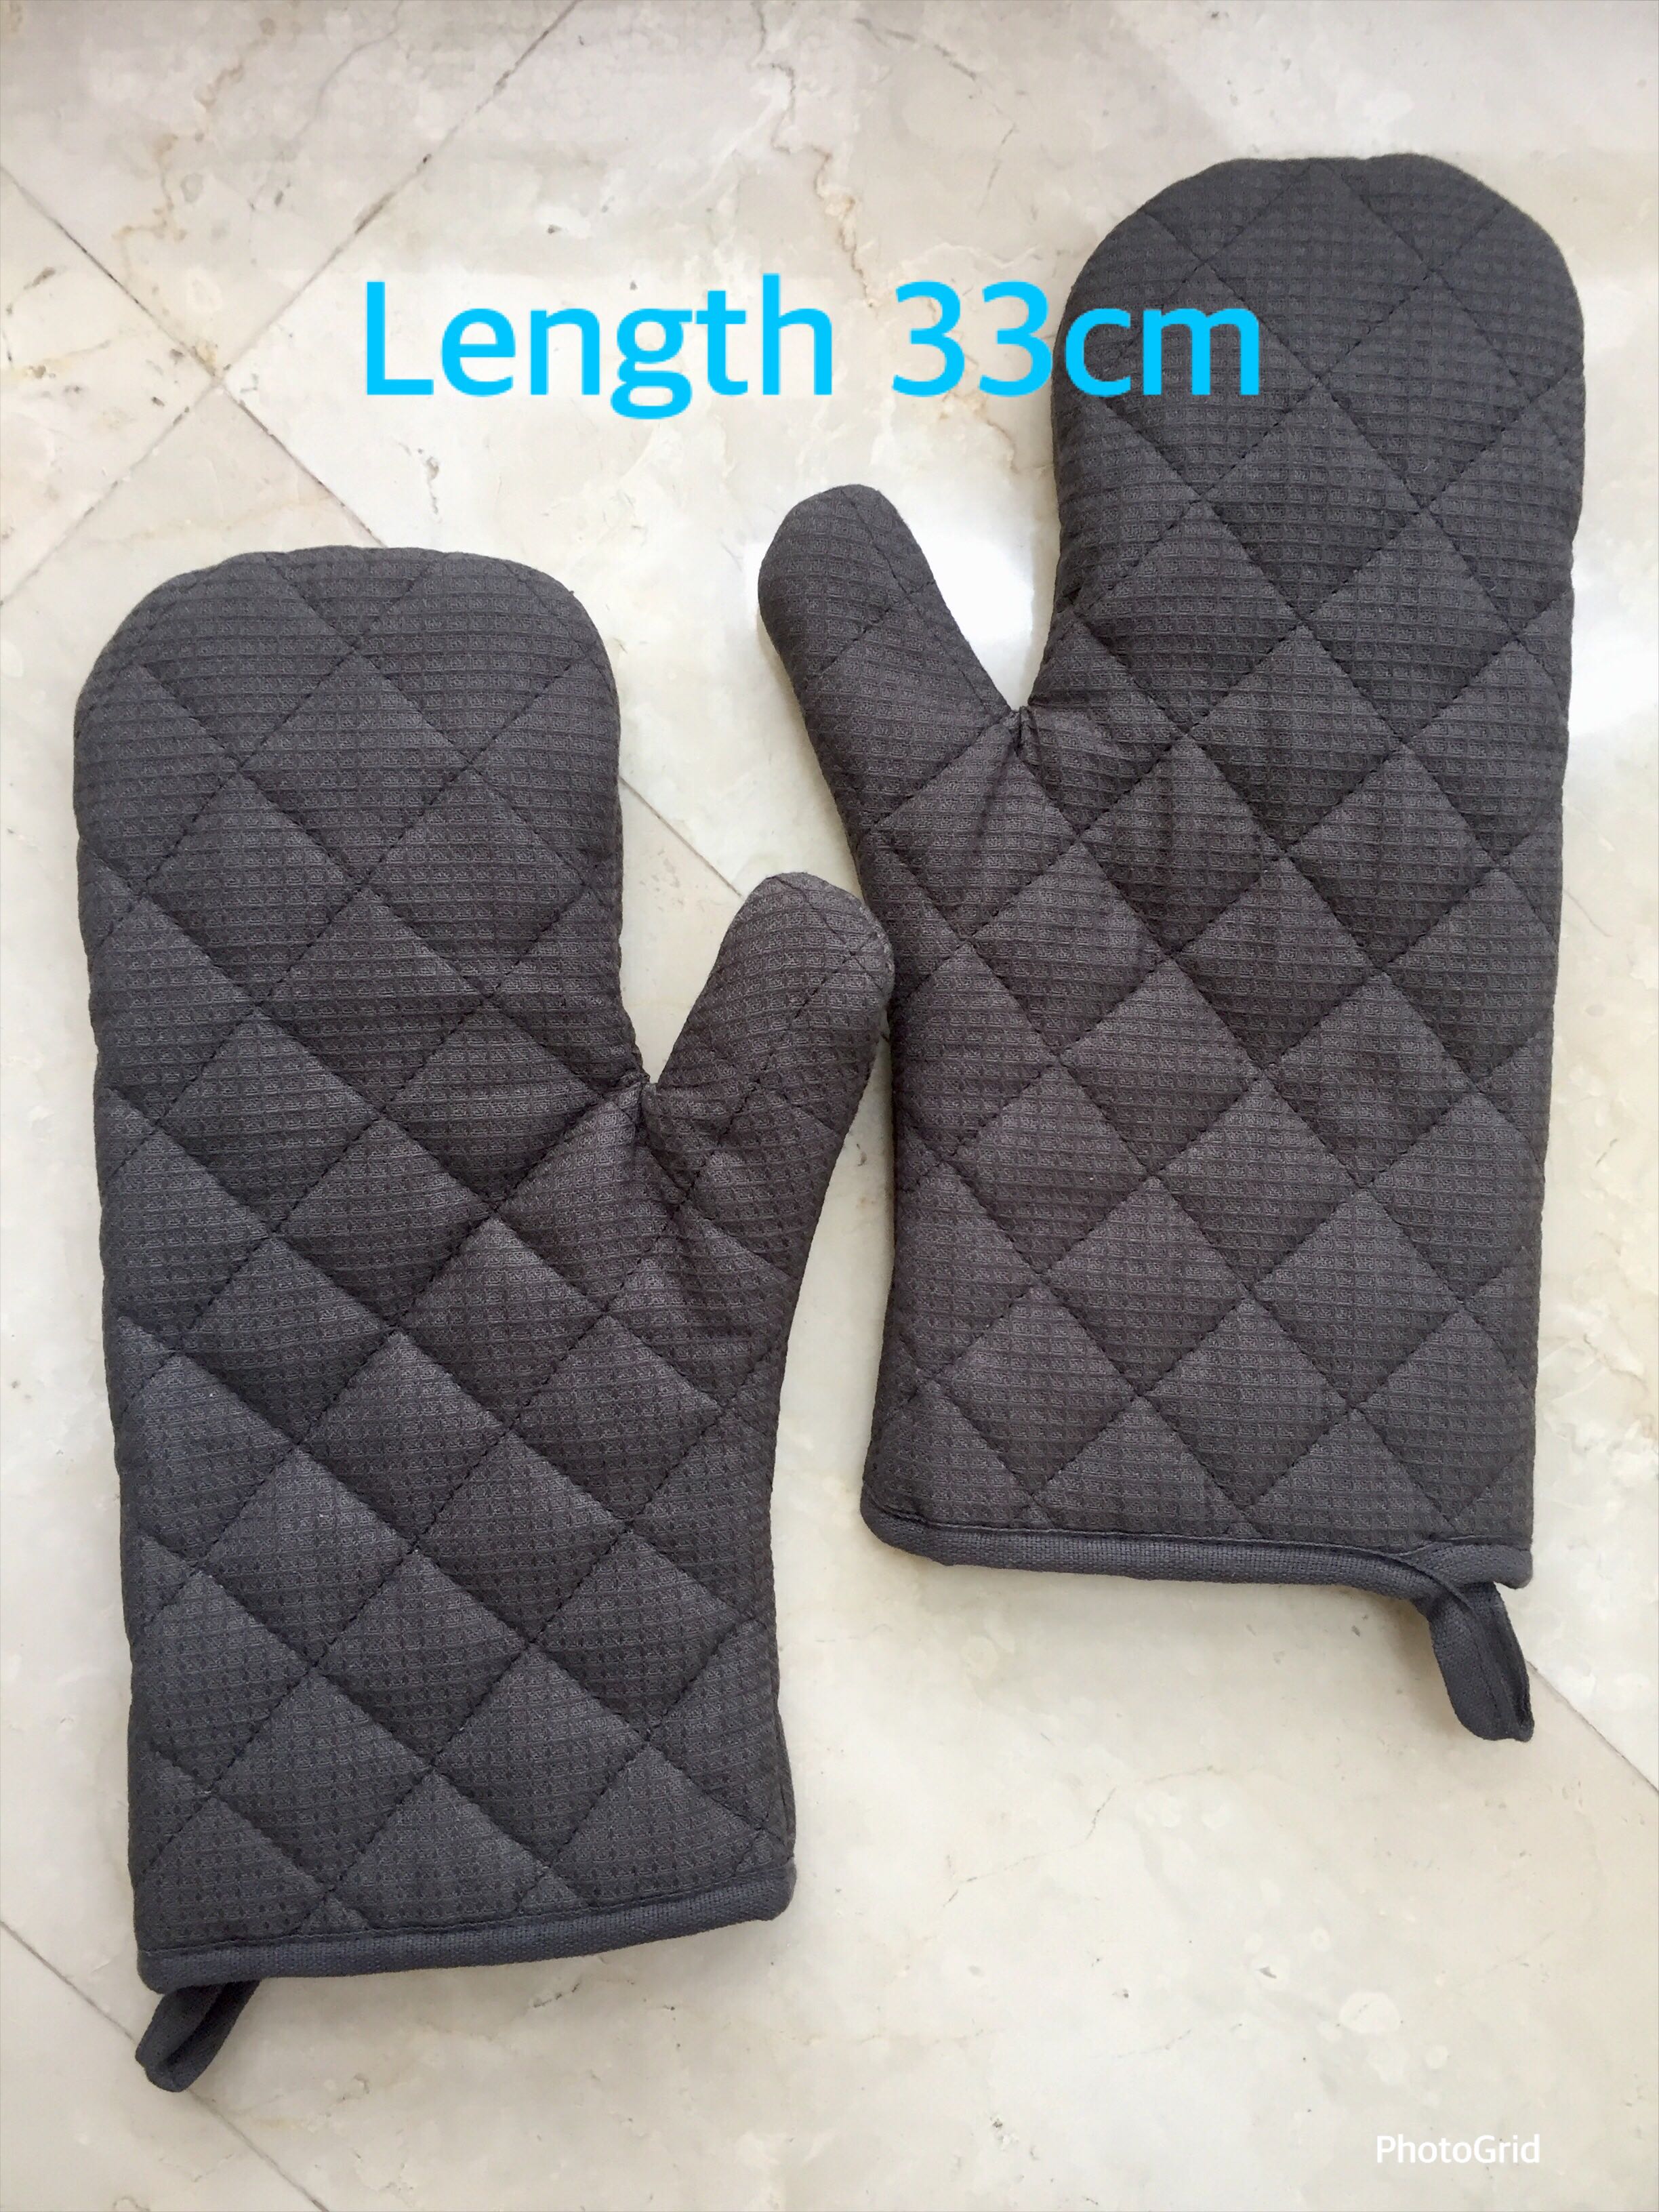 https://media.karousell.com/media/photos/products/2022/8/7/ikea_rinnig_oven_mitts_1659852910_5391d539.jpg